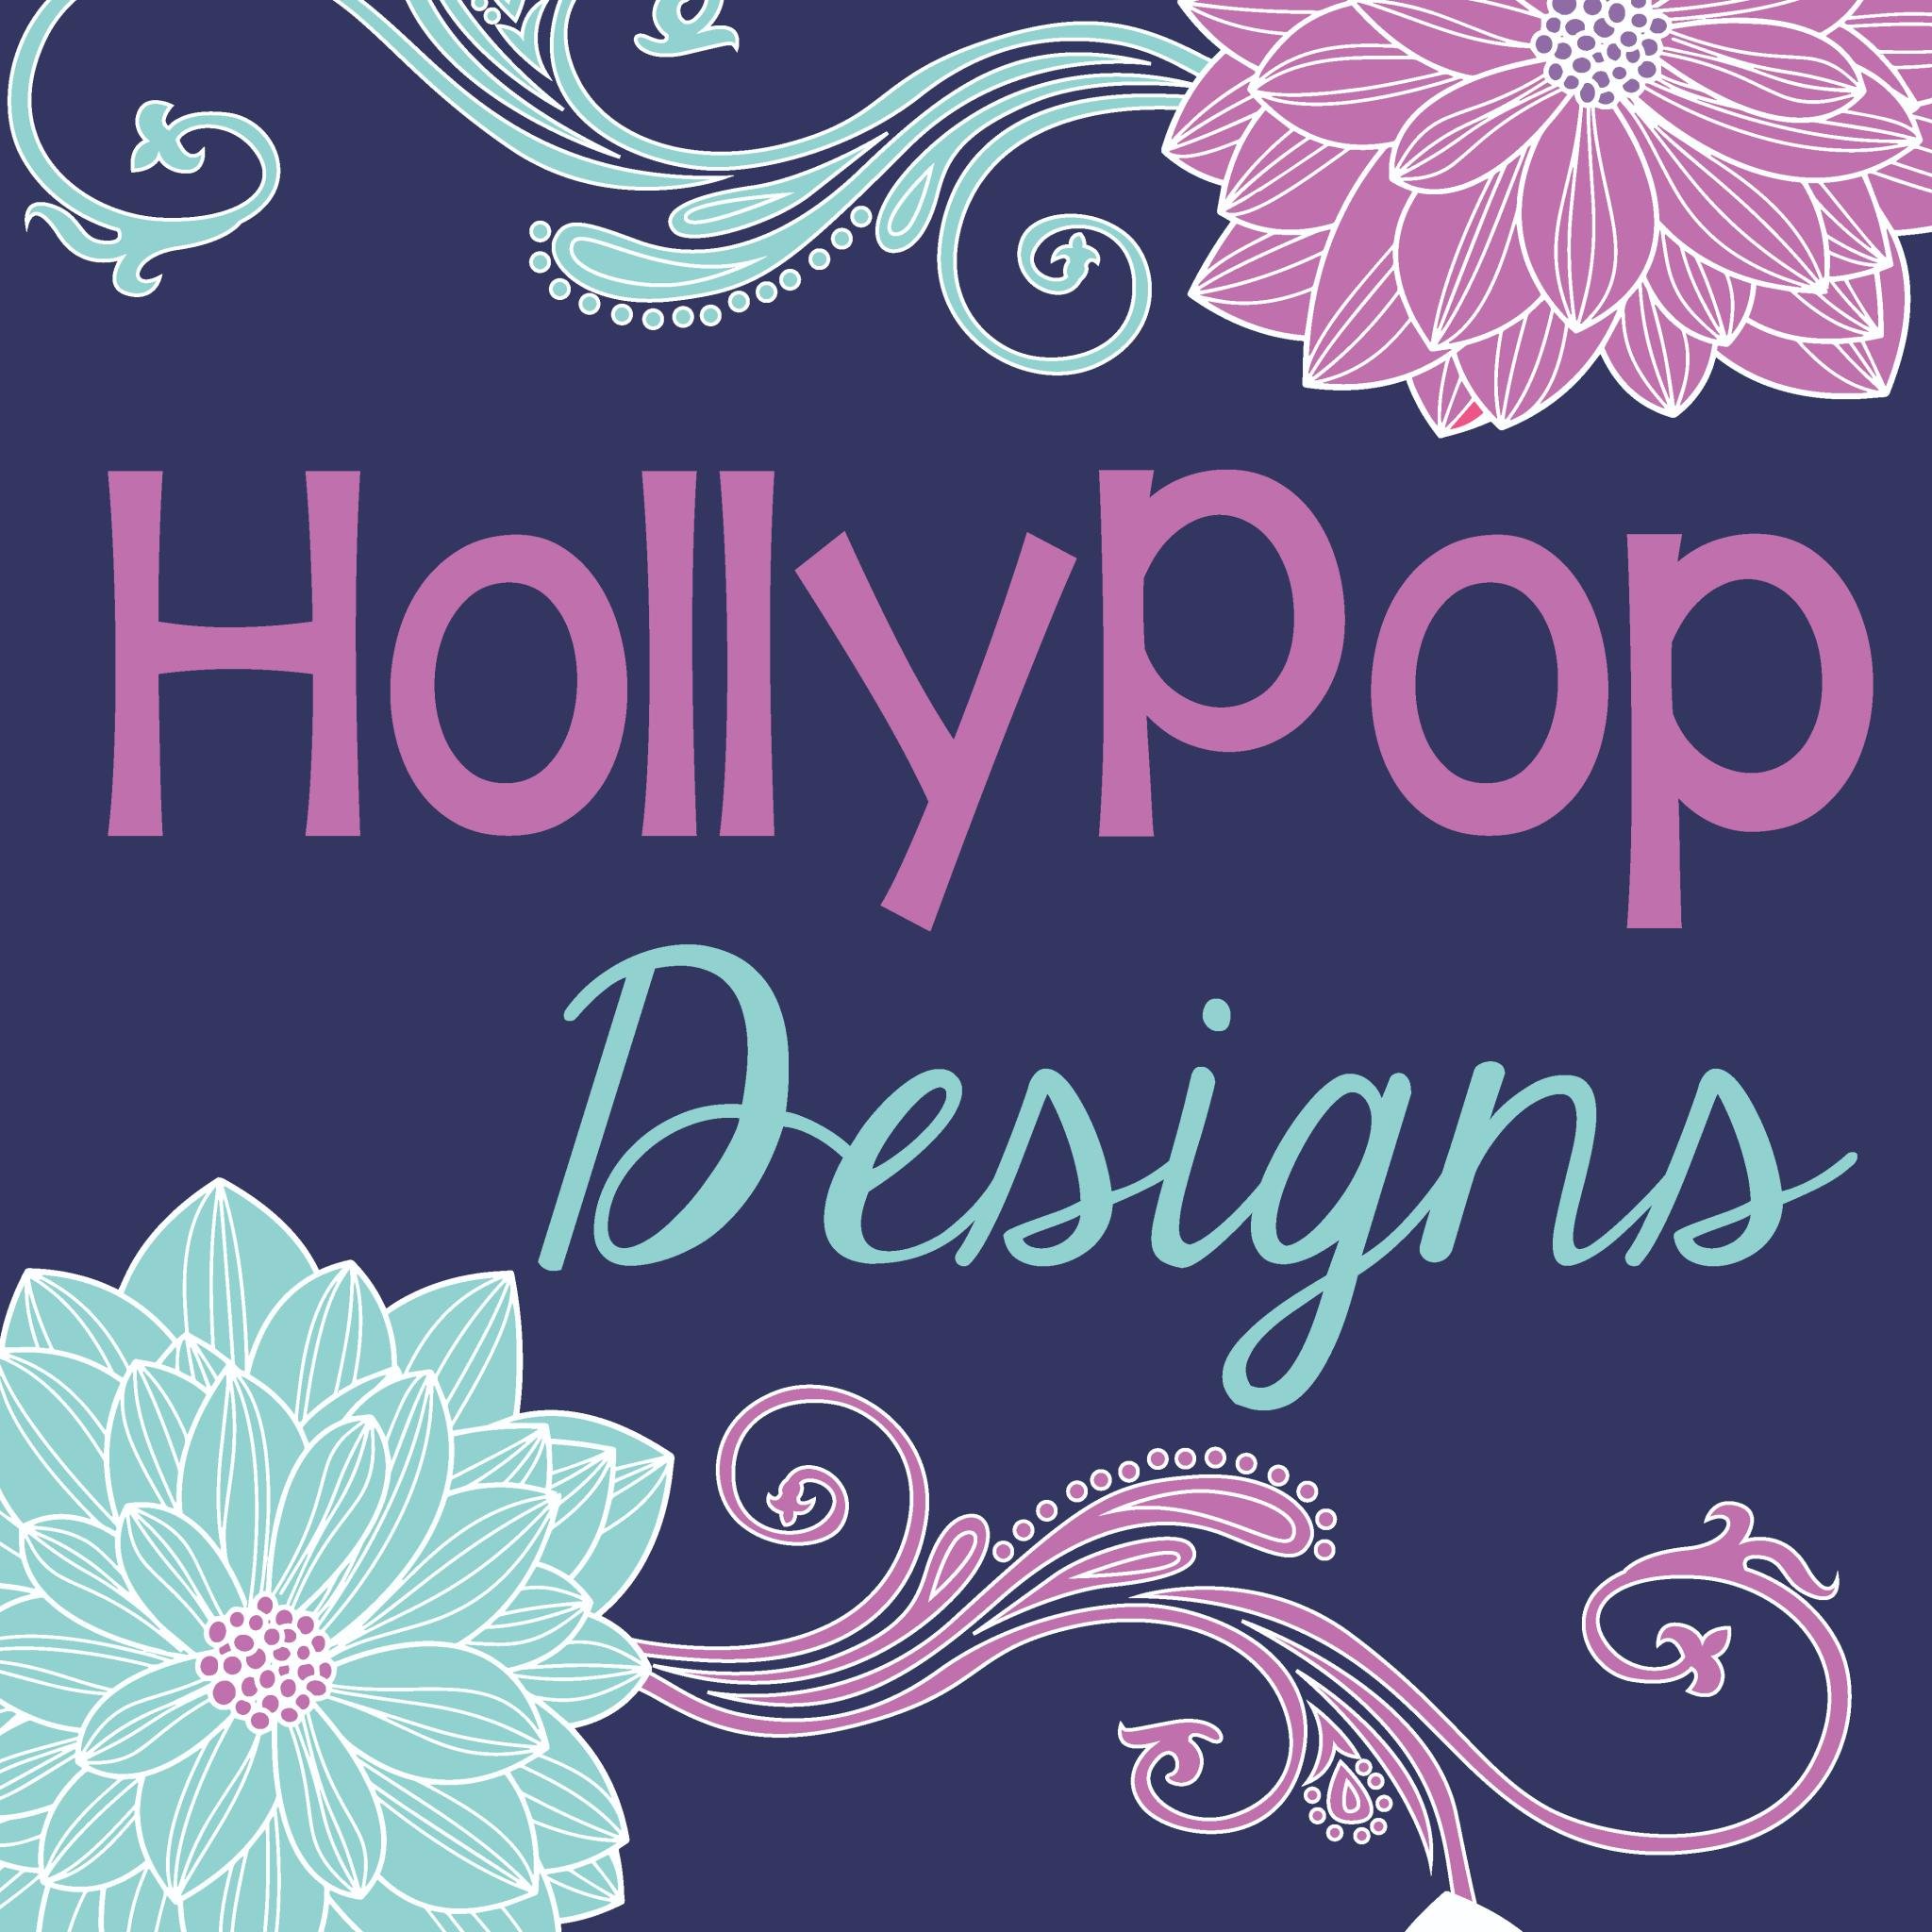 Owner and Designer at HollyPop Designs and HollyPop Printables. Wife to Joey, mama to Keane. Love art and design.... And coffee.